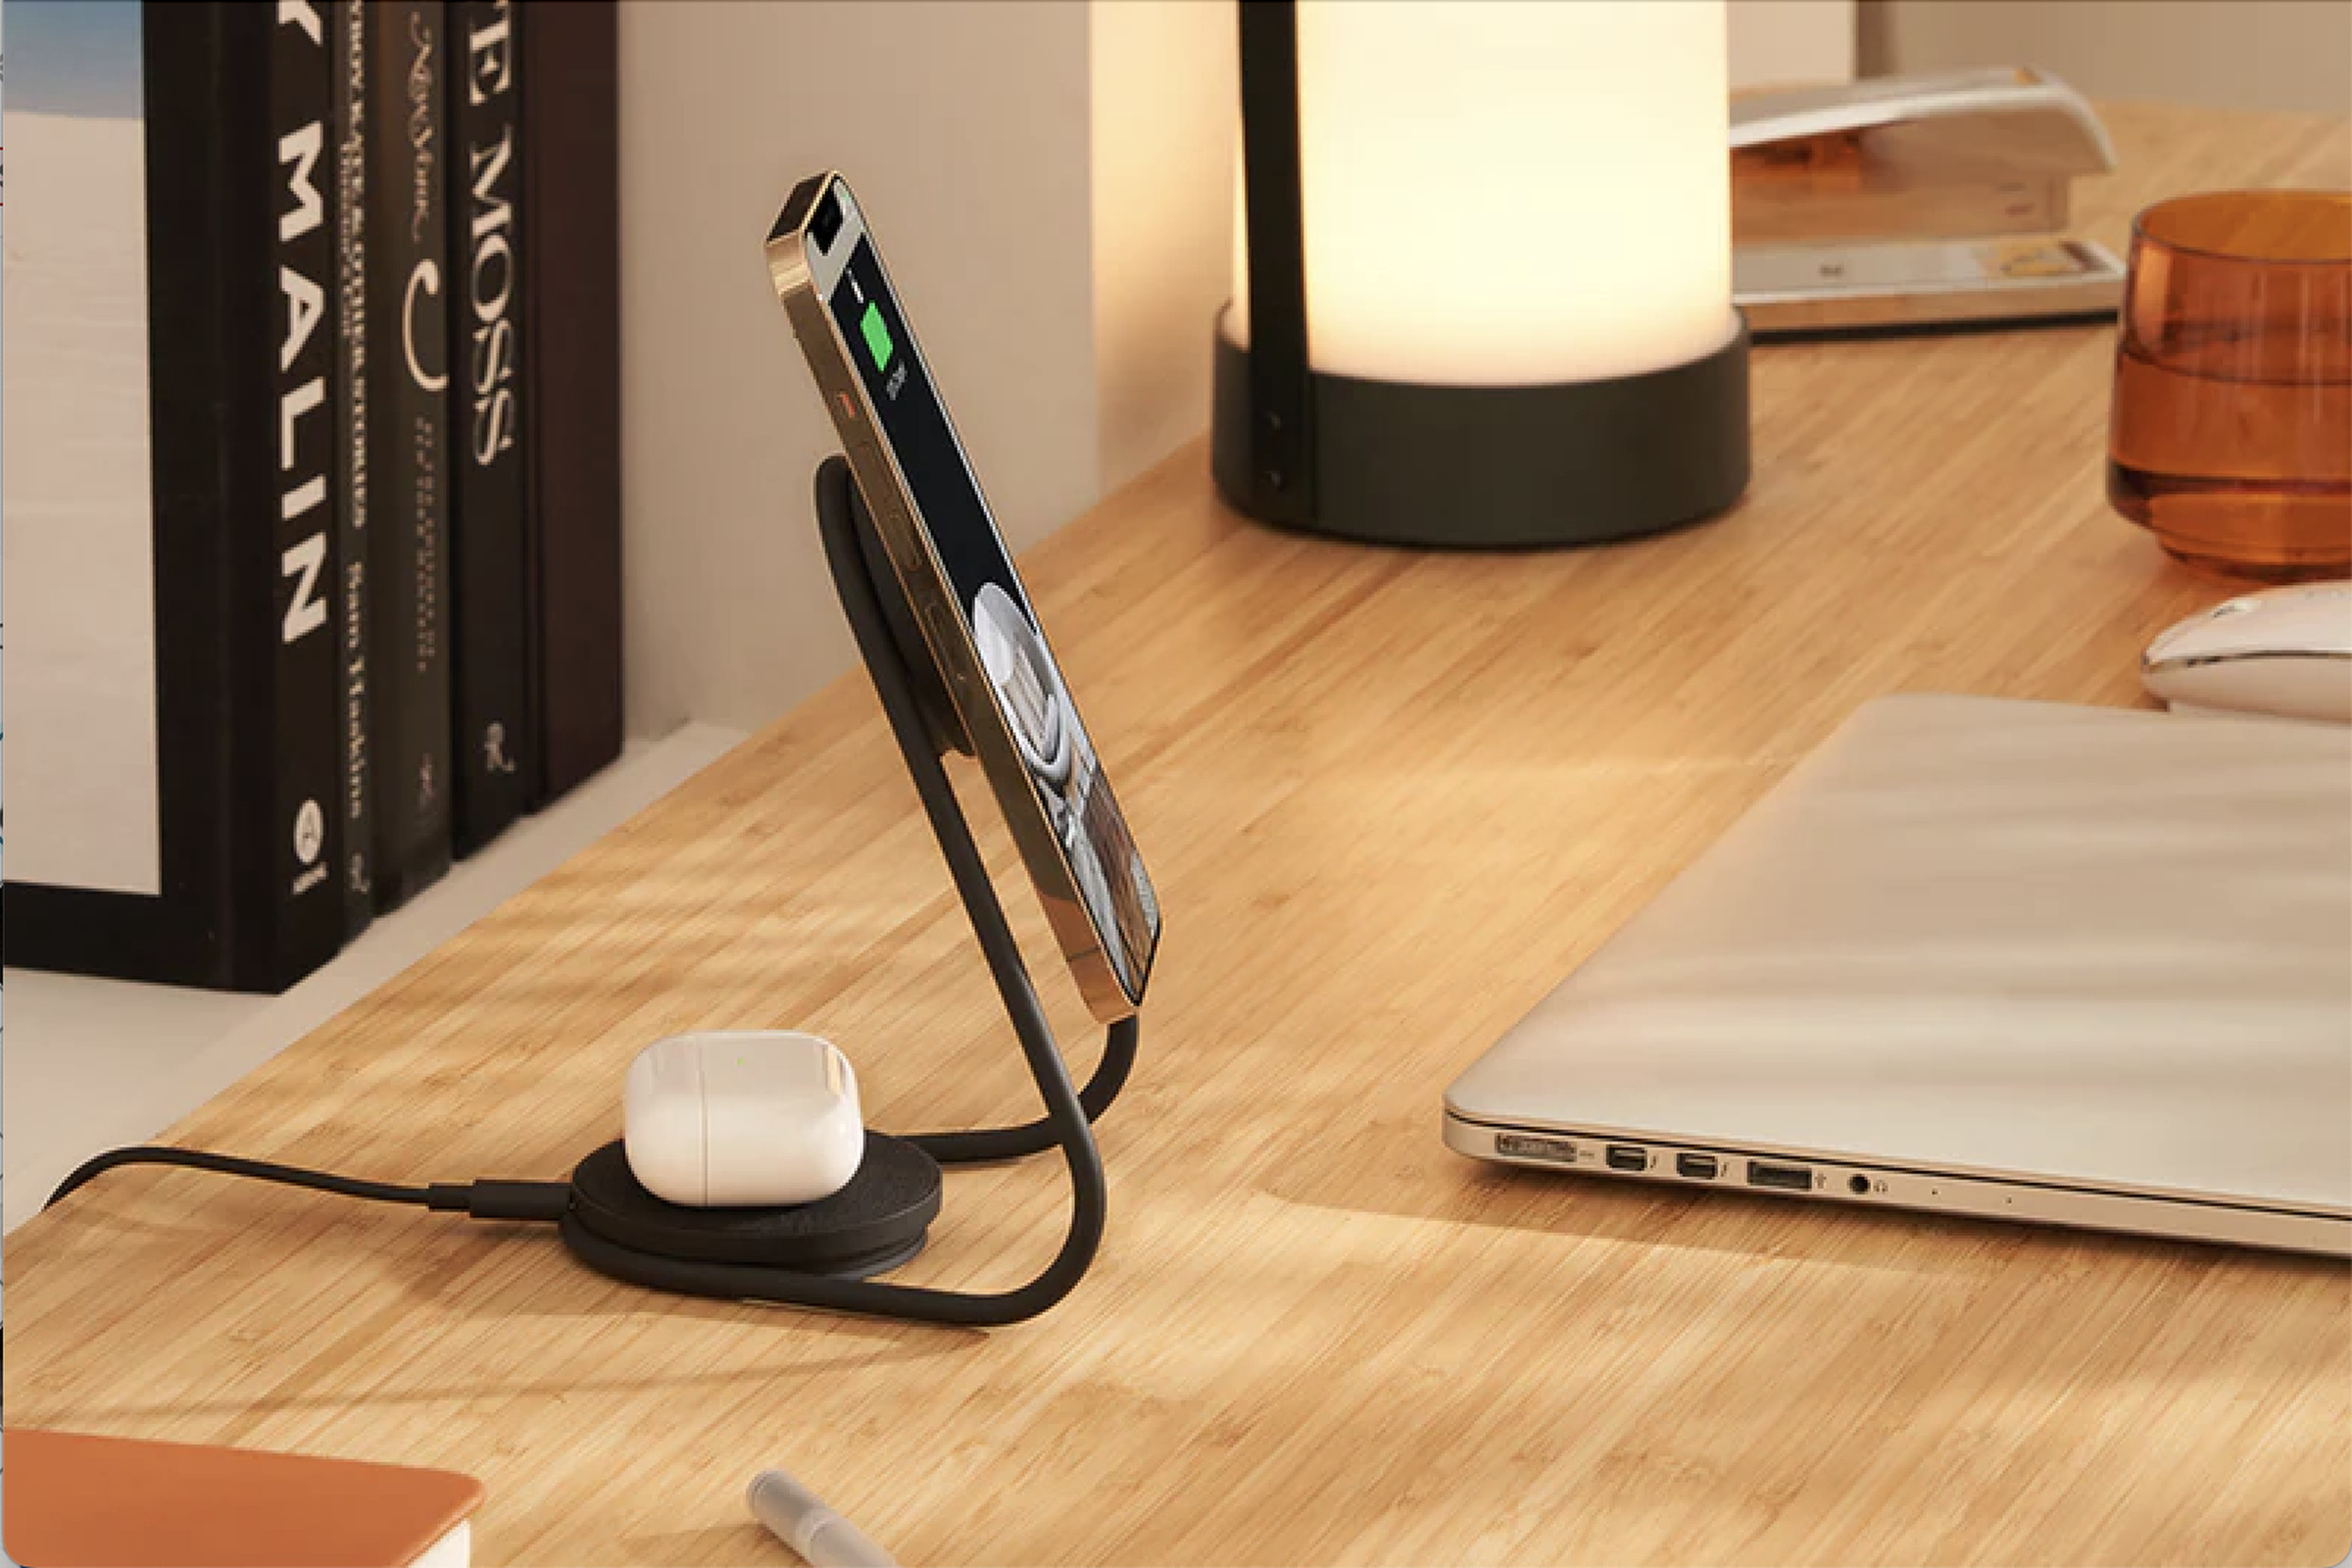 Metallic stand on a desk holding an iphone and, in back, an AirPods case.